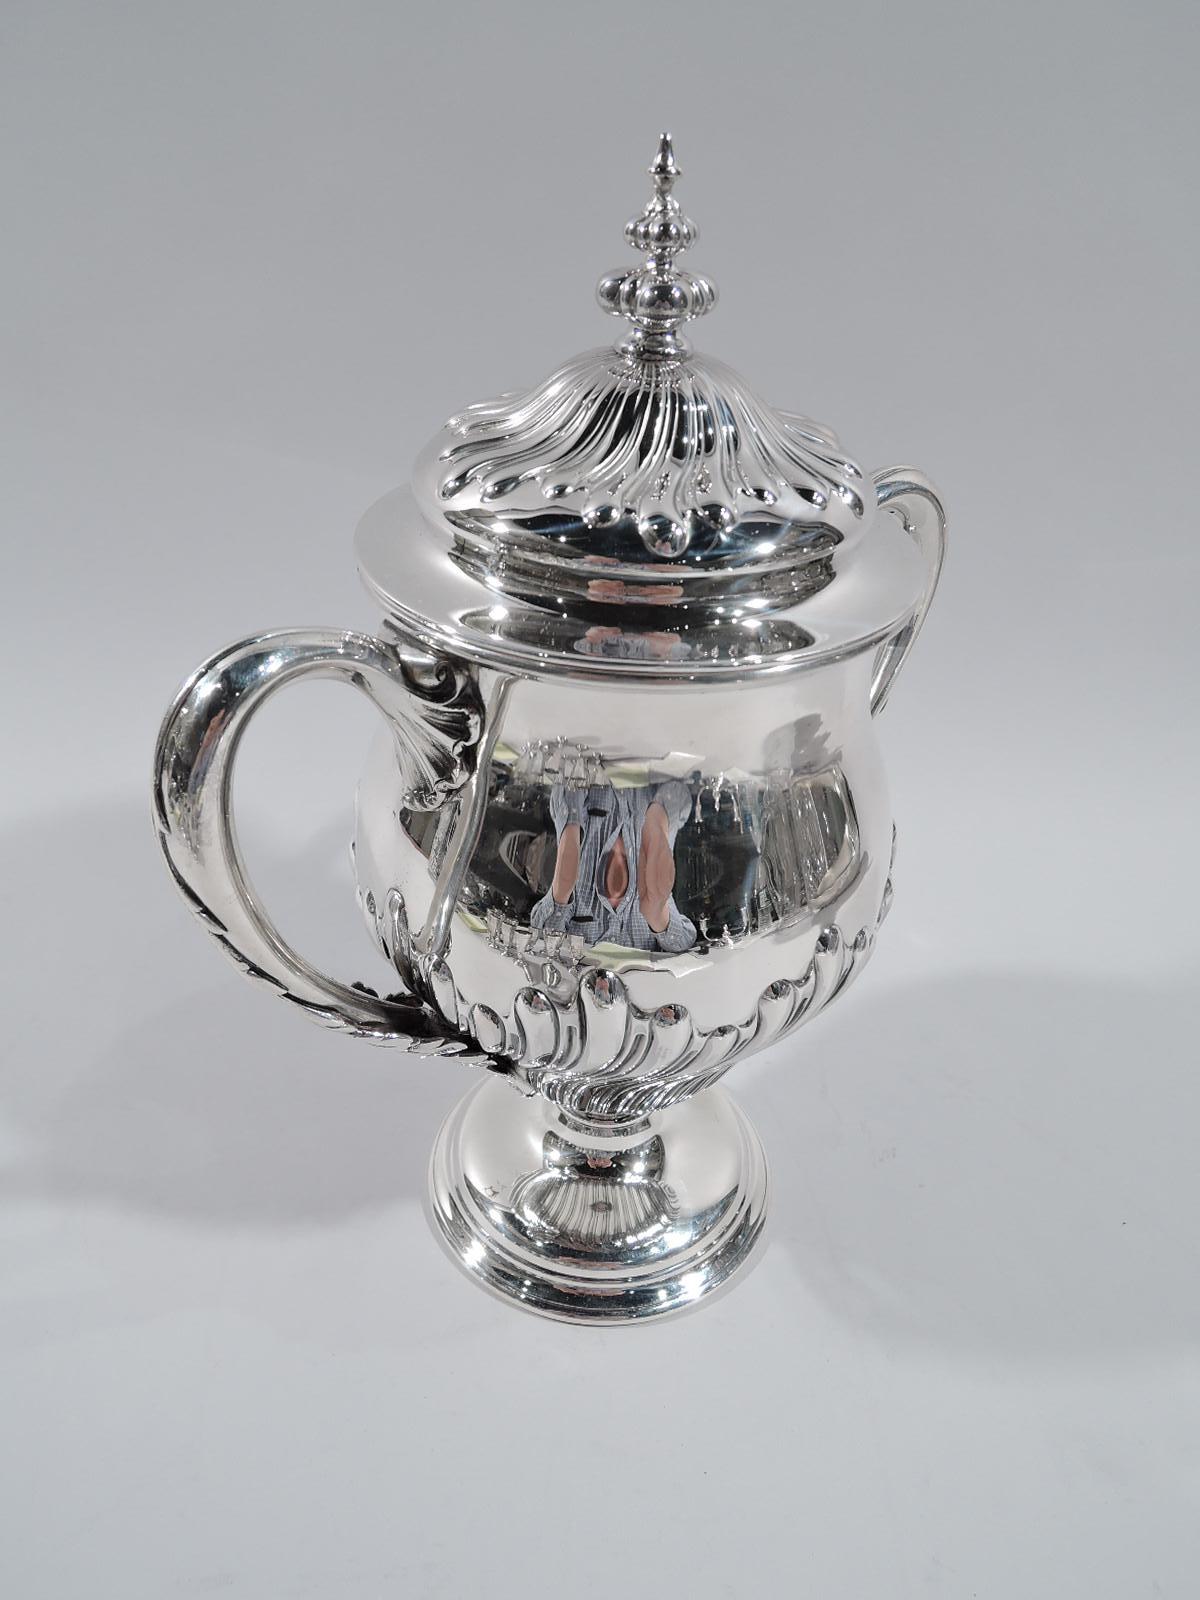 Classical sterling silver covered urn. Made by Howard in New York in 1896. Baluster with leaf-mounted and -covered looping scroll handles, and raised and stepped foot. Cover domed with ornamental finial. Twisted and alternating flutes and gadroons